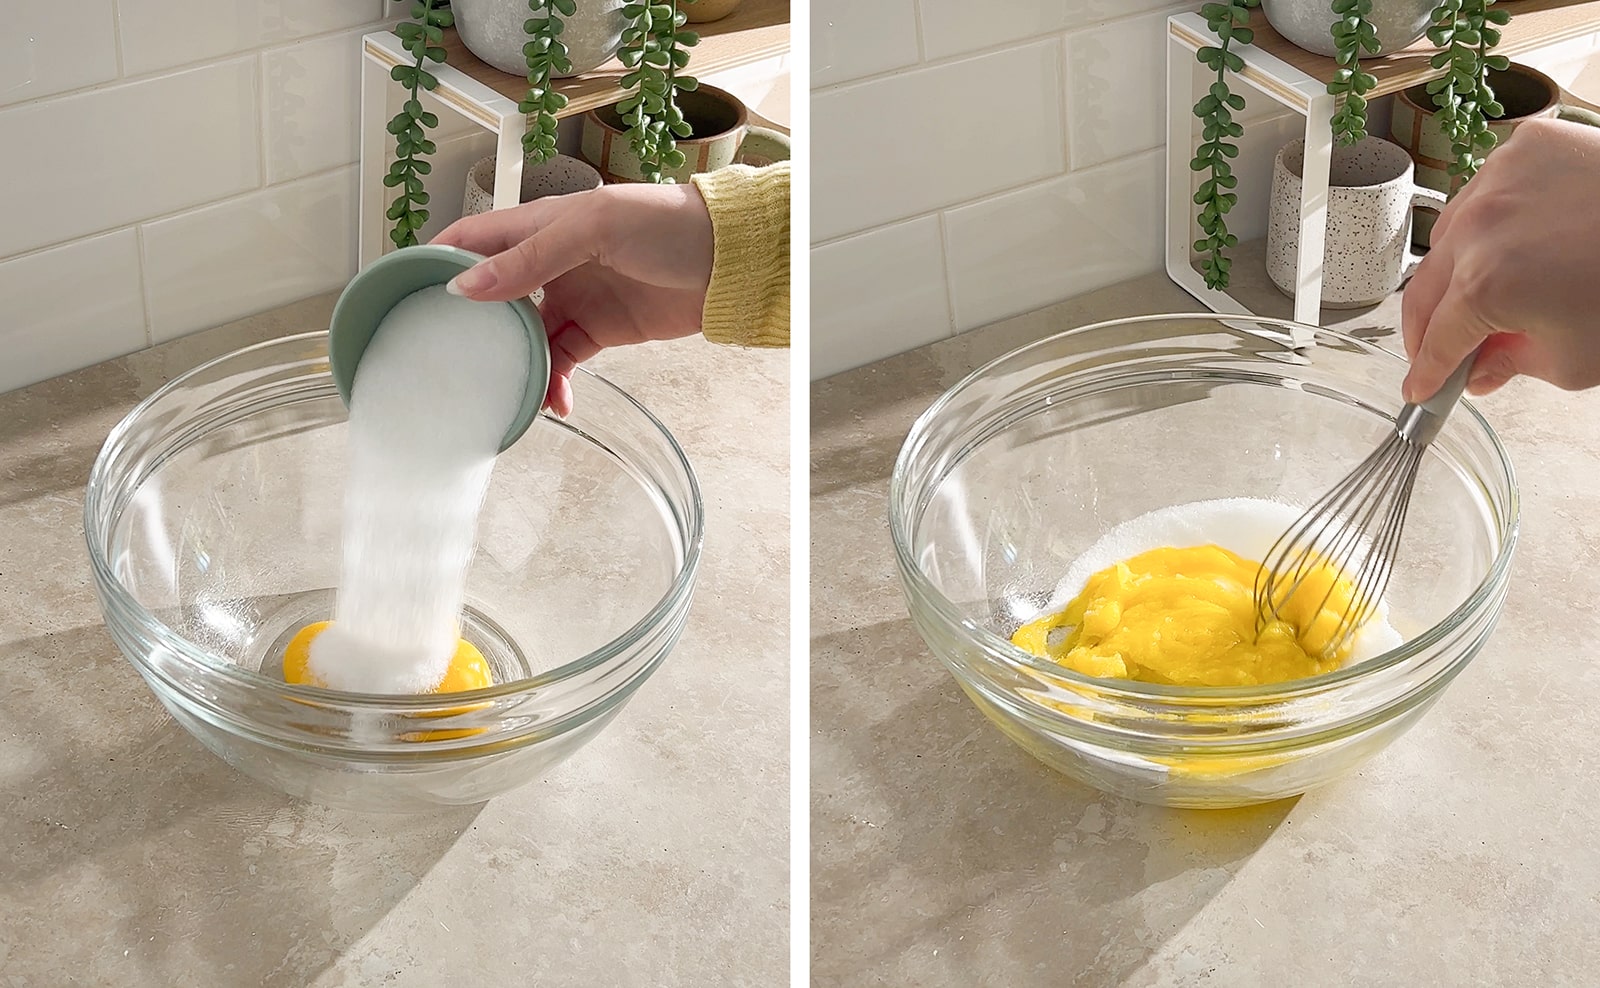 Left to right: pouring sugar into bowl of egg yolks, whisking egg yolks and sugar together in a bowl.